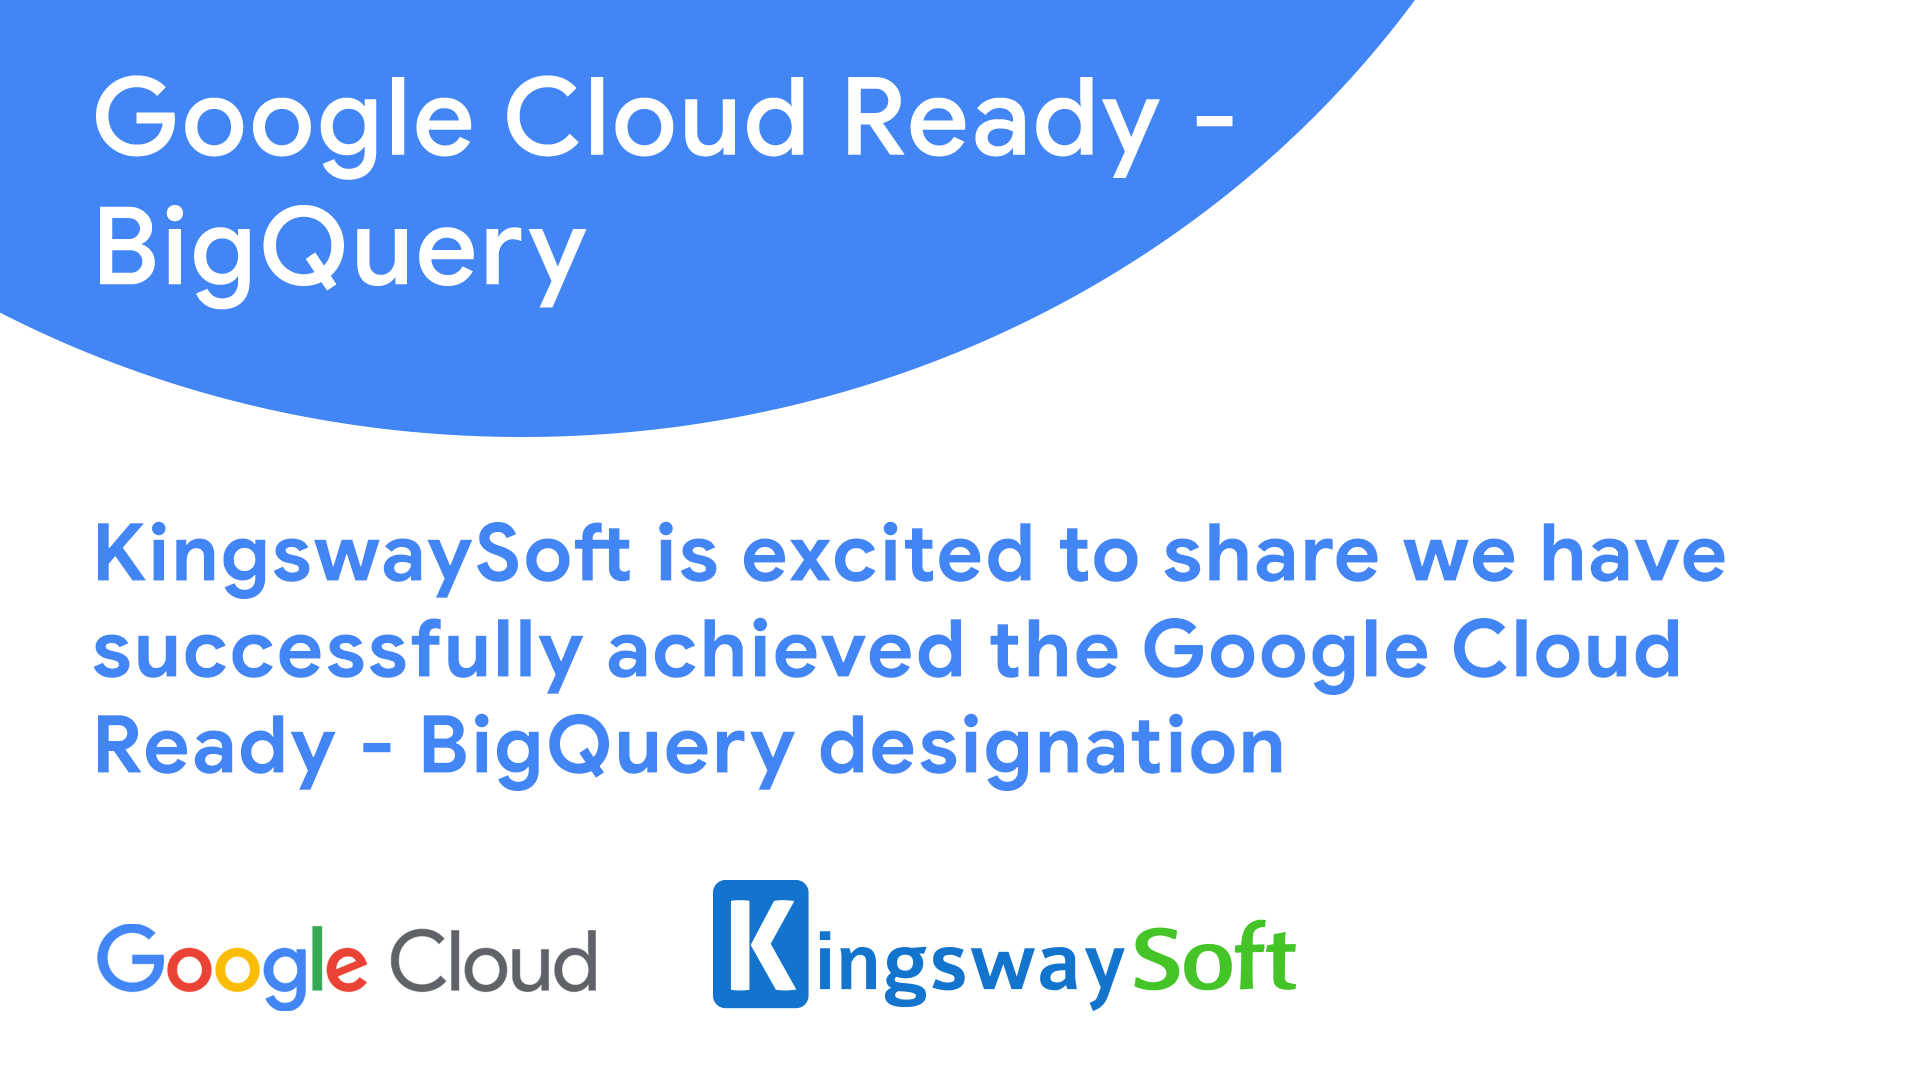 KingswaySoft has received the Google Cloud Ready - BigQuery designation